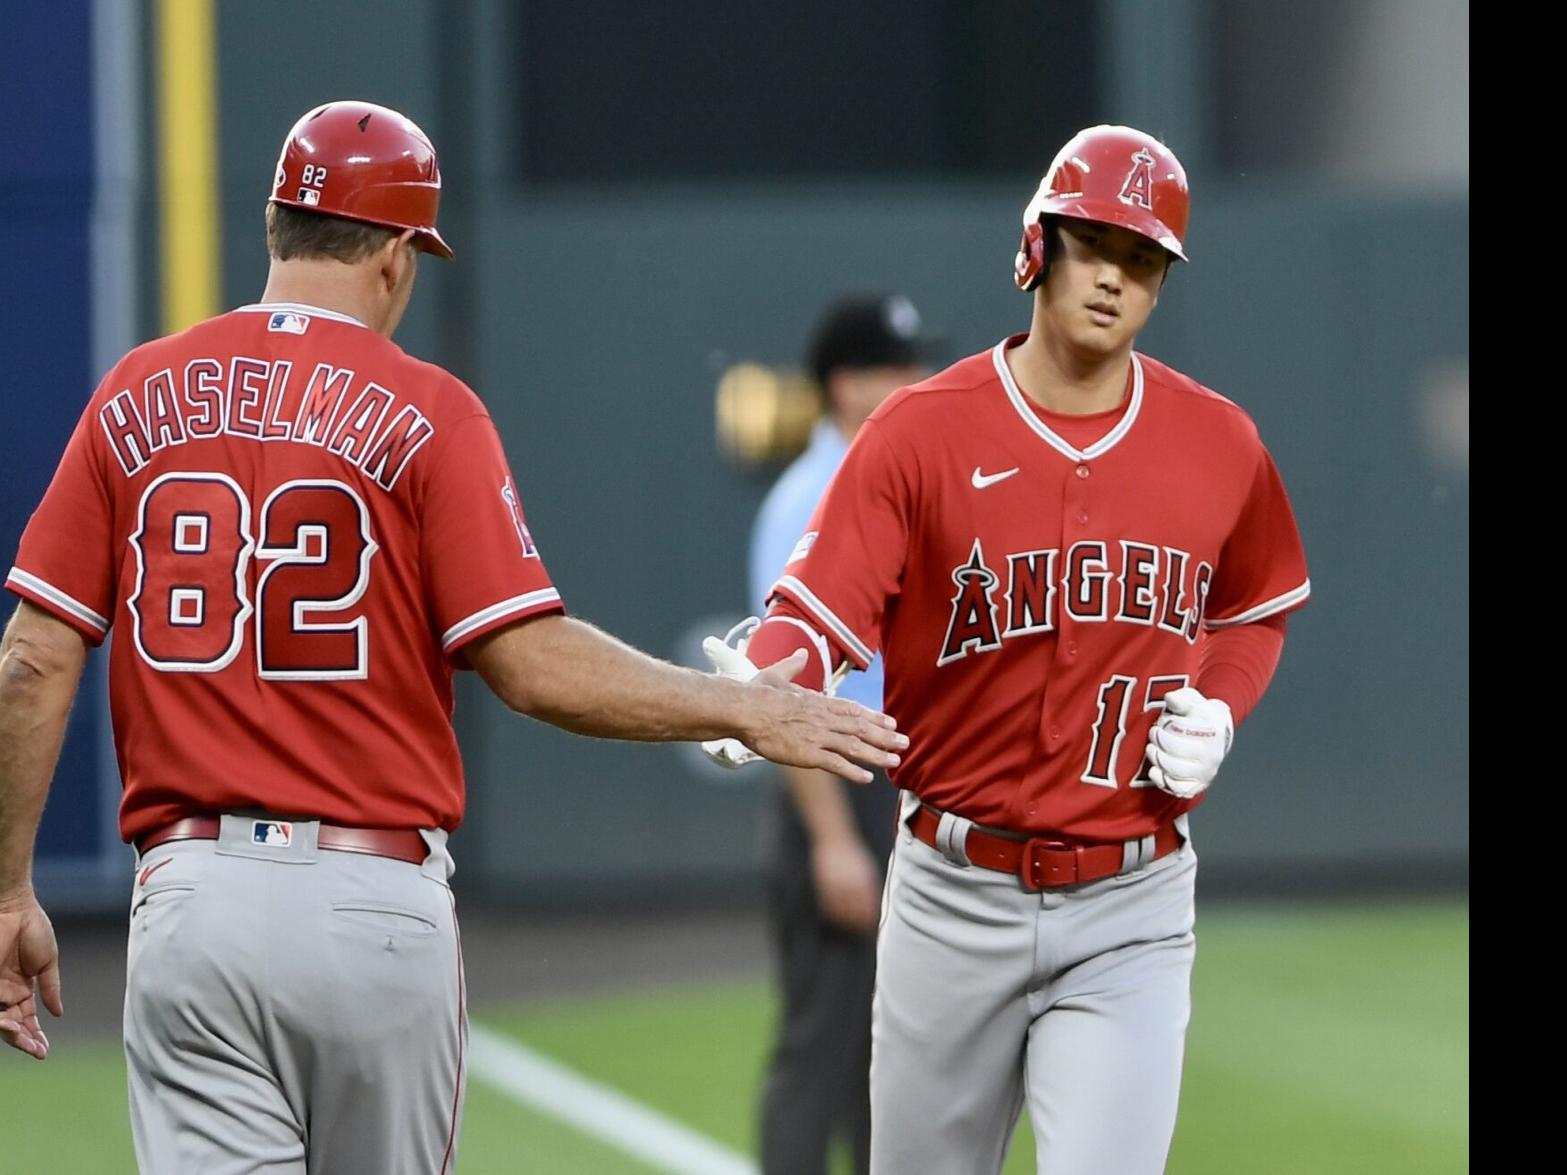 The Latest: Ohtani gets win in two-way All-Star first